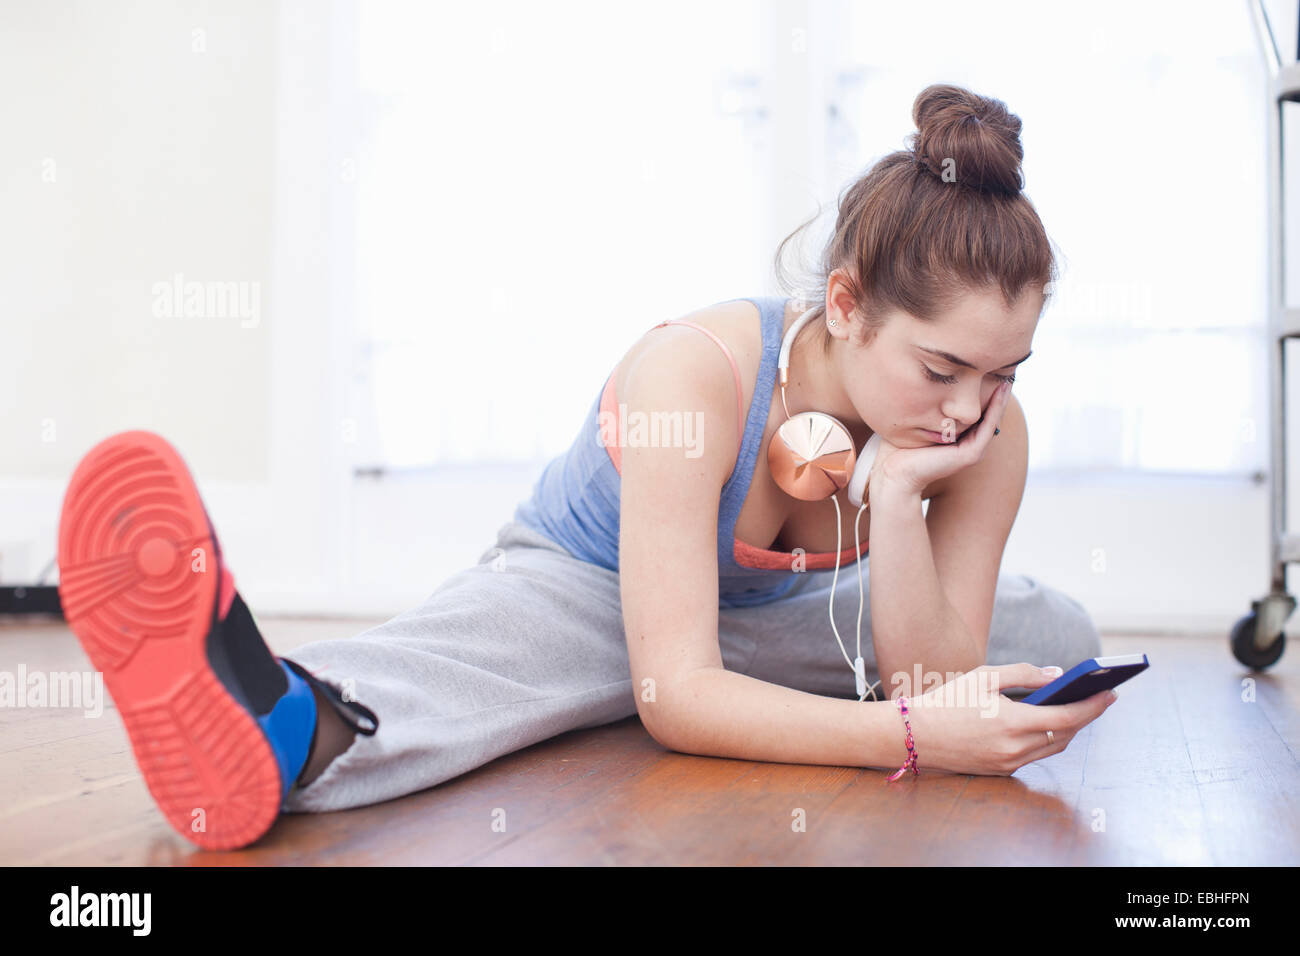 Teenage girl warming up and looking at smartphone in ballet school Stock Photo